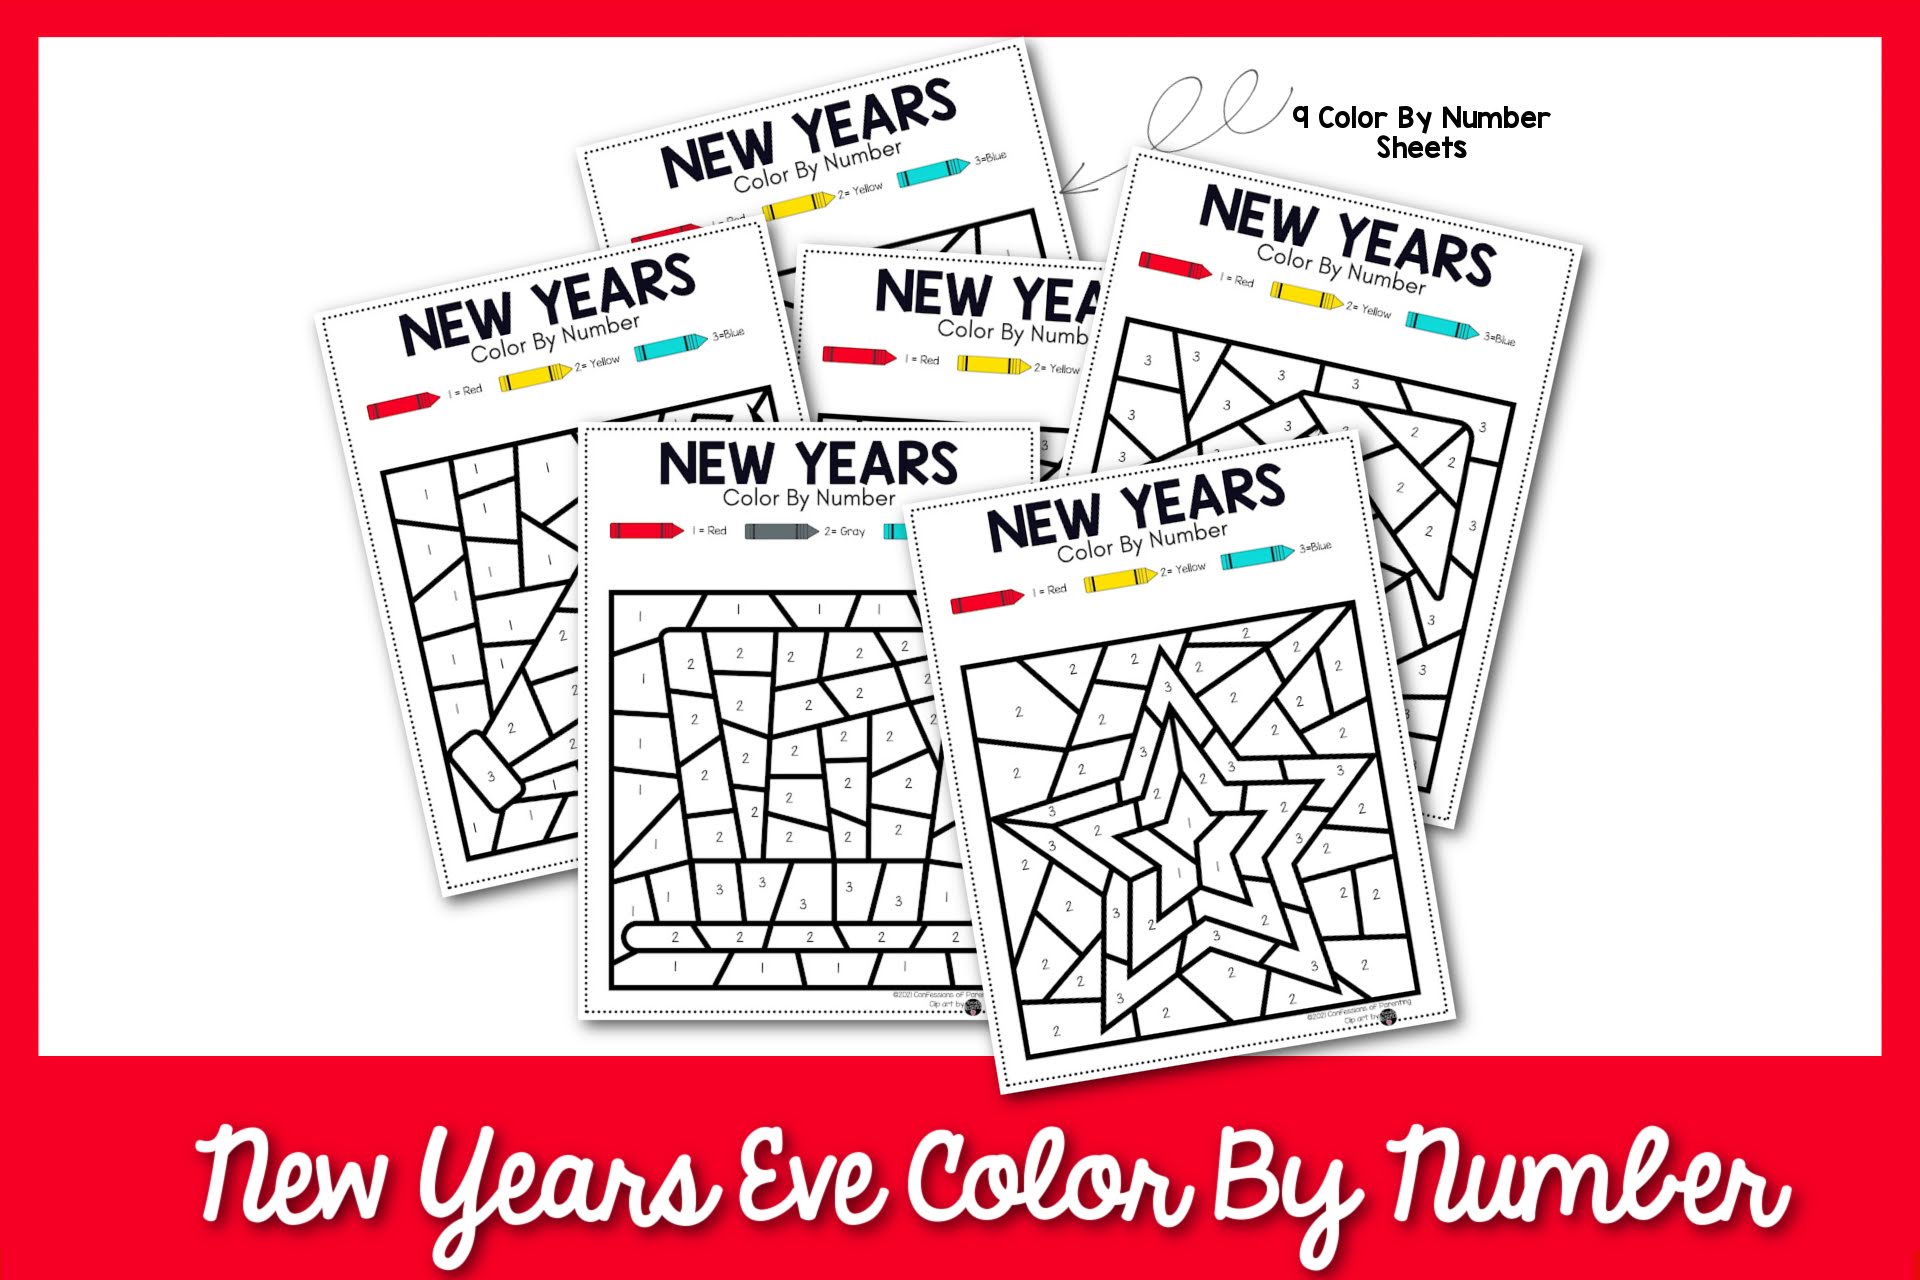 New Years Even Color By Number Sheets with red border